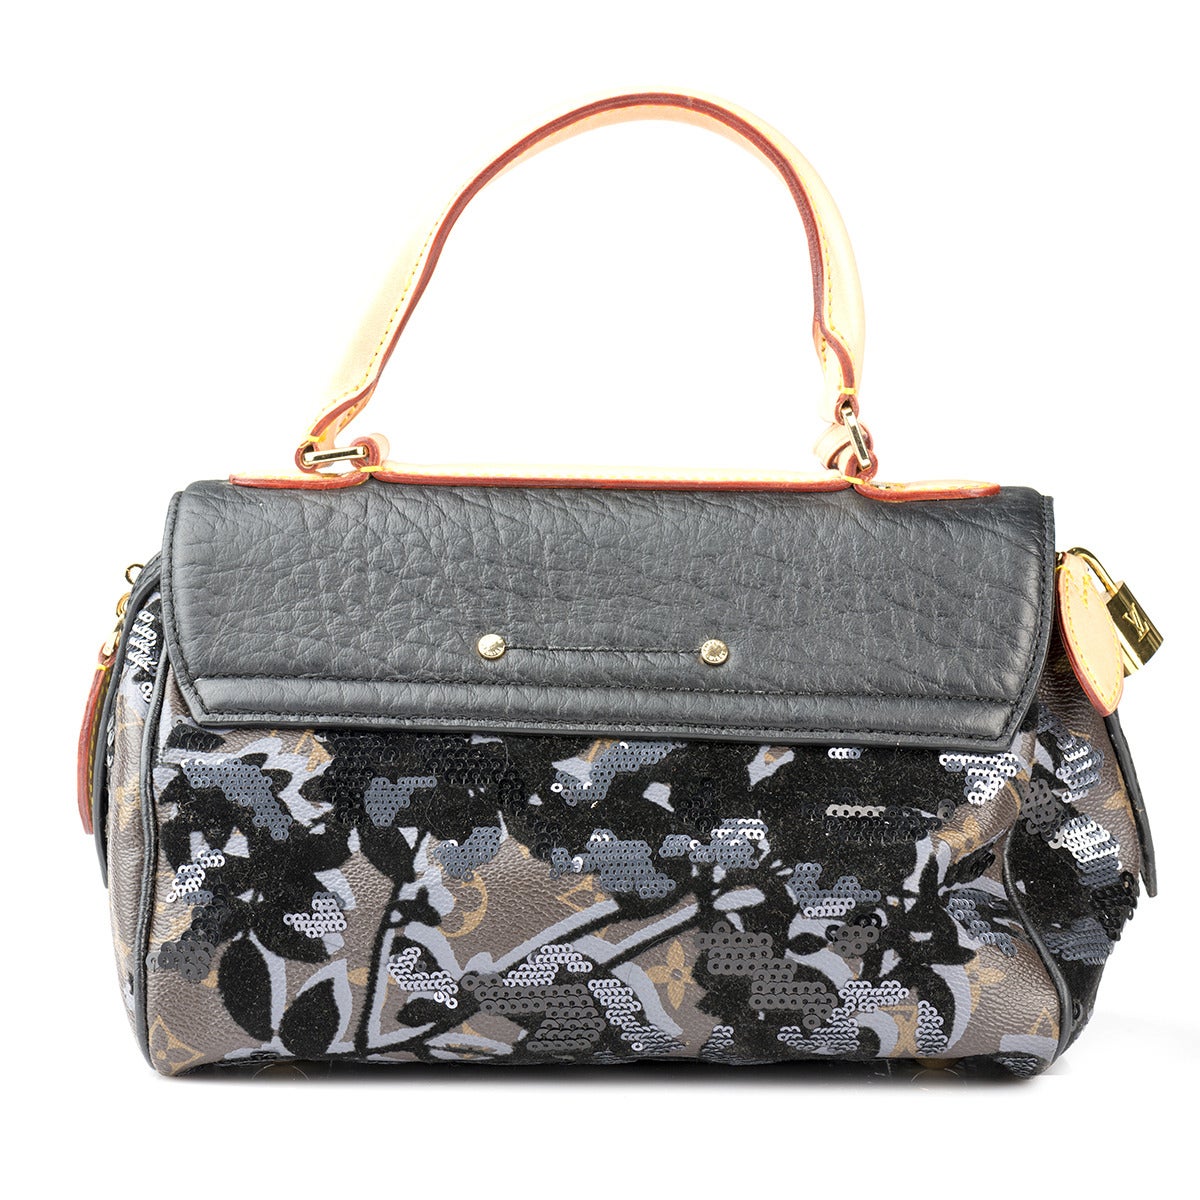 Mervellous Louis Vuitton Monogram Fleur de Jais Carrousel
2010 / 2011 Fall Winter Collection, Limited edition
LV Monogram on toile canvas 
Abstract floral deign in three layers of print, sequins and velvet 
Vachetta cowhide rolled leather top